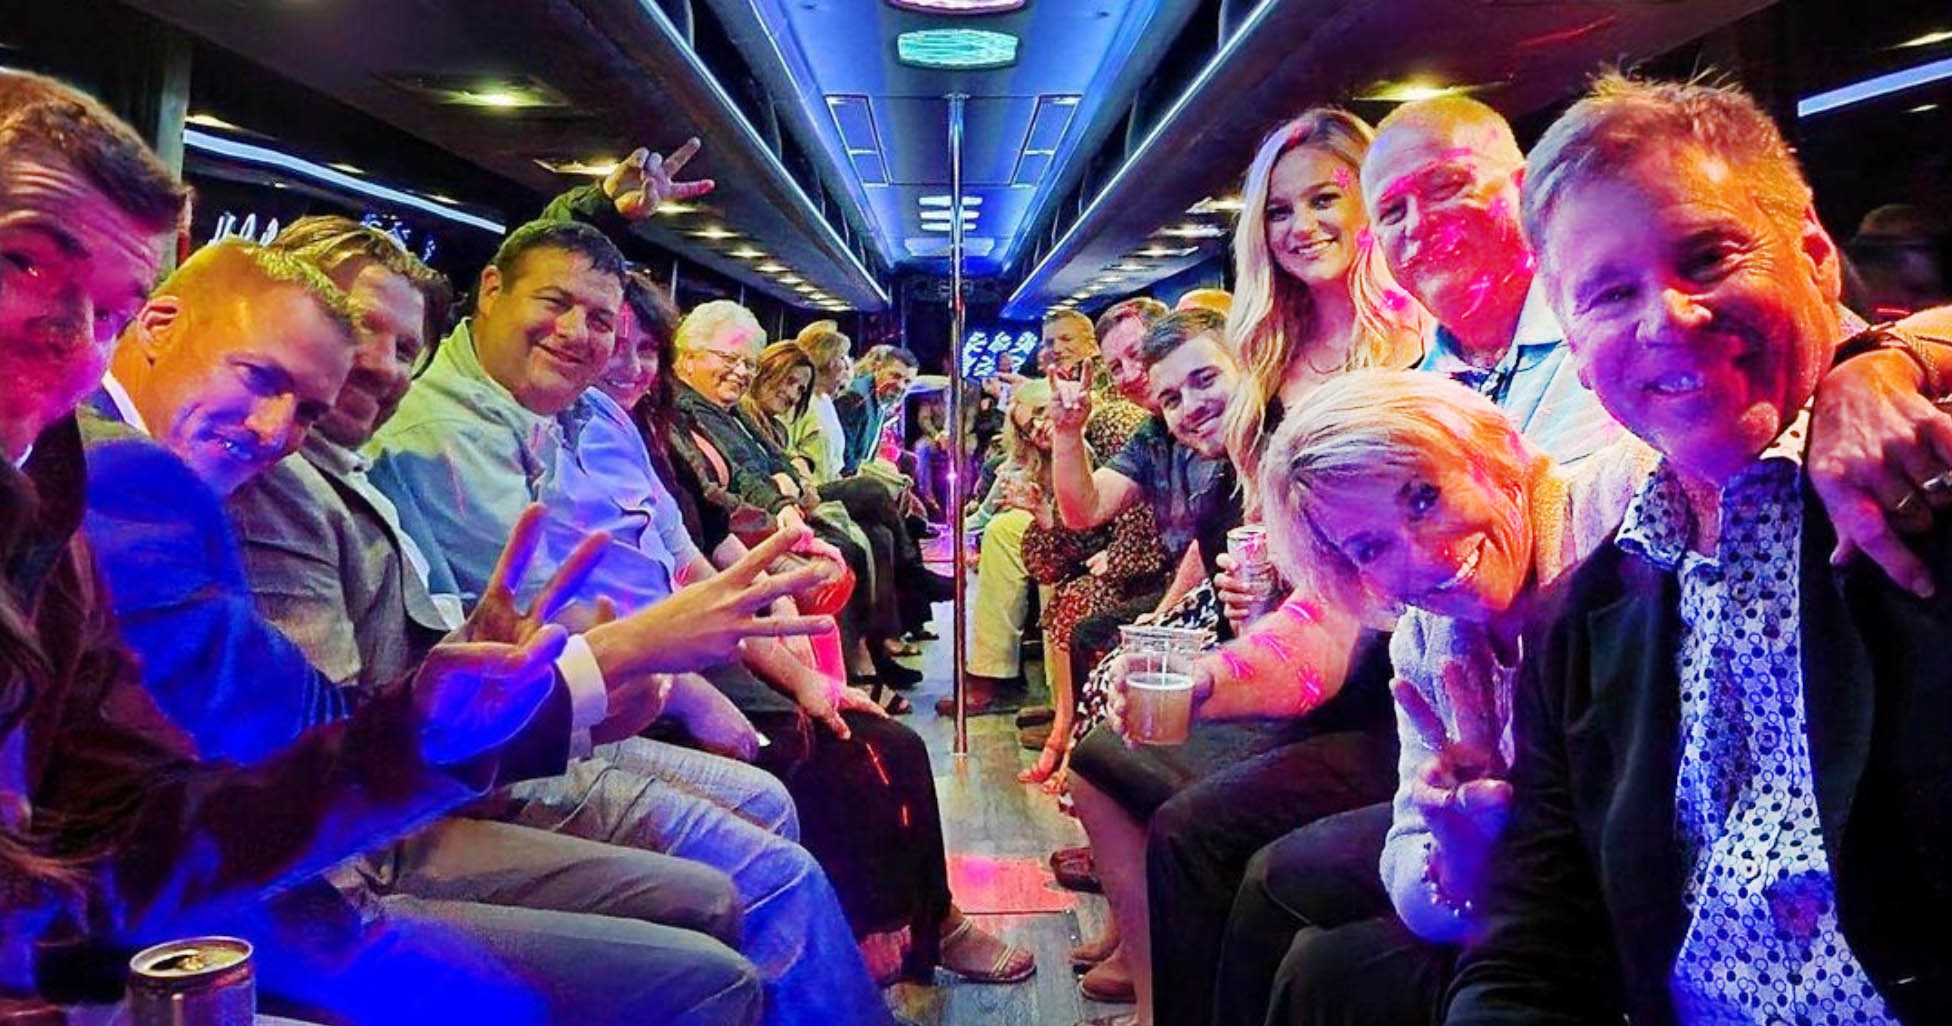 Wedding party celebrating on our party bus